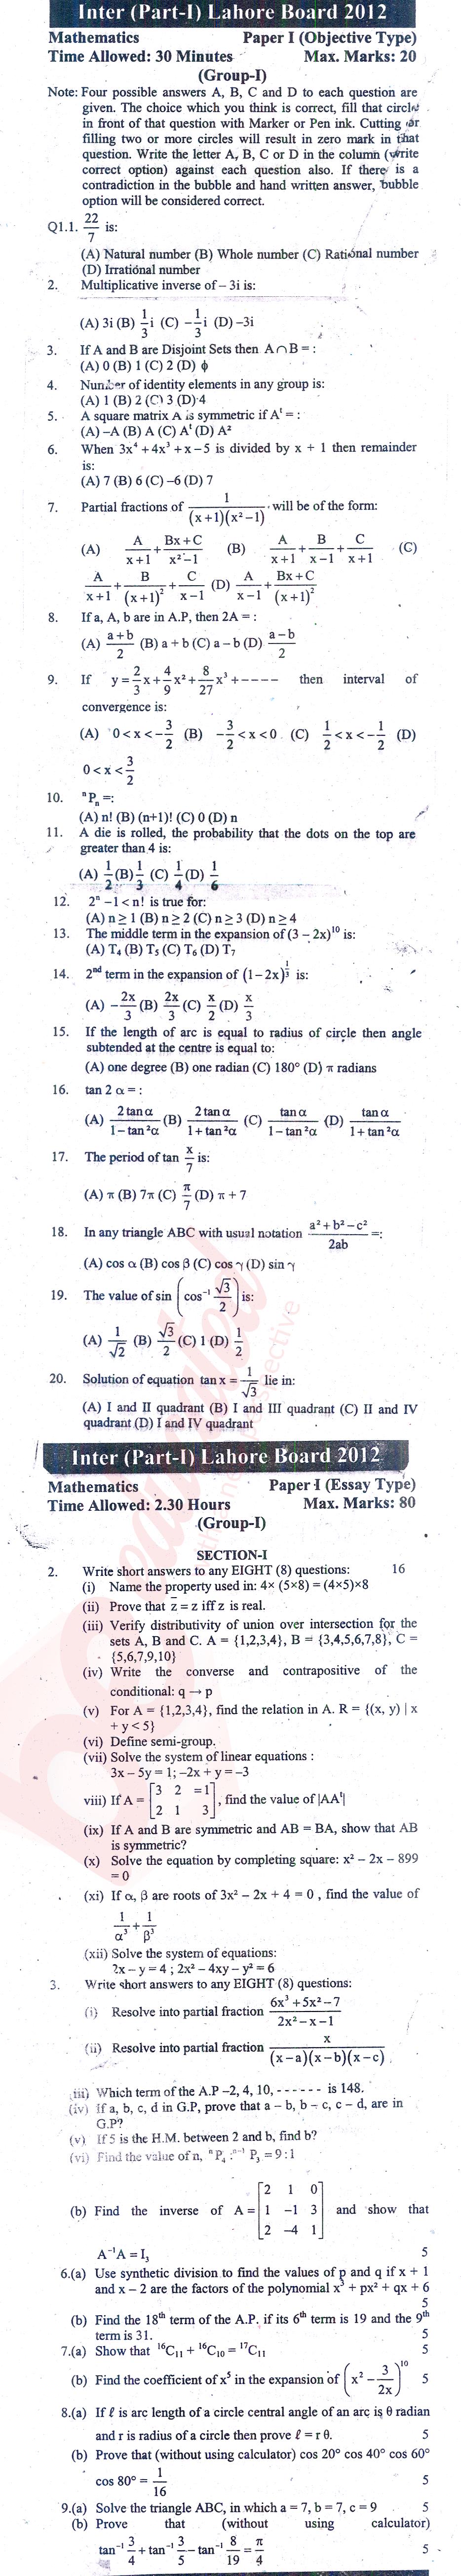 Math 11th class Past Paper Group 1 BISE Lahore 2012